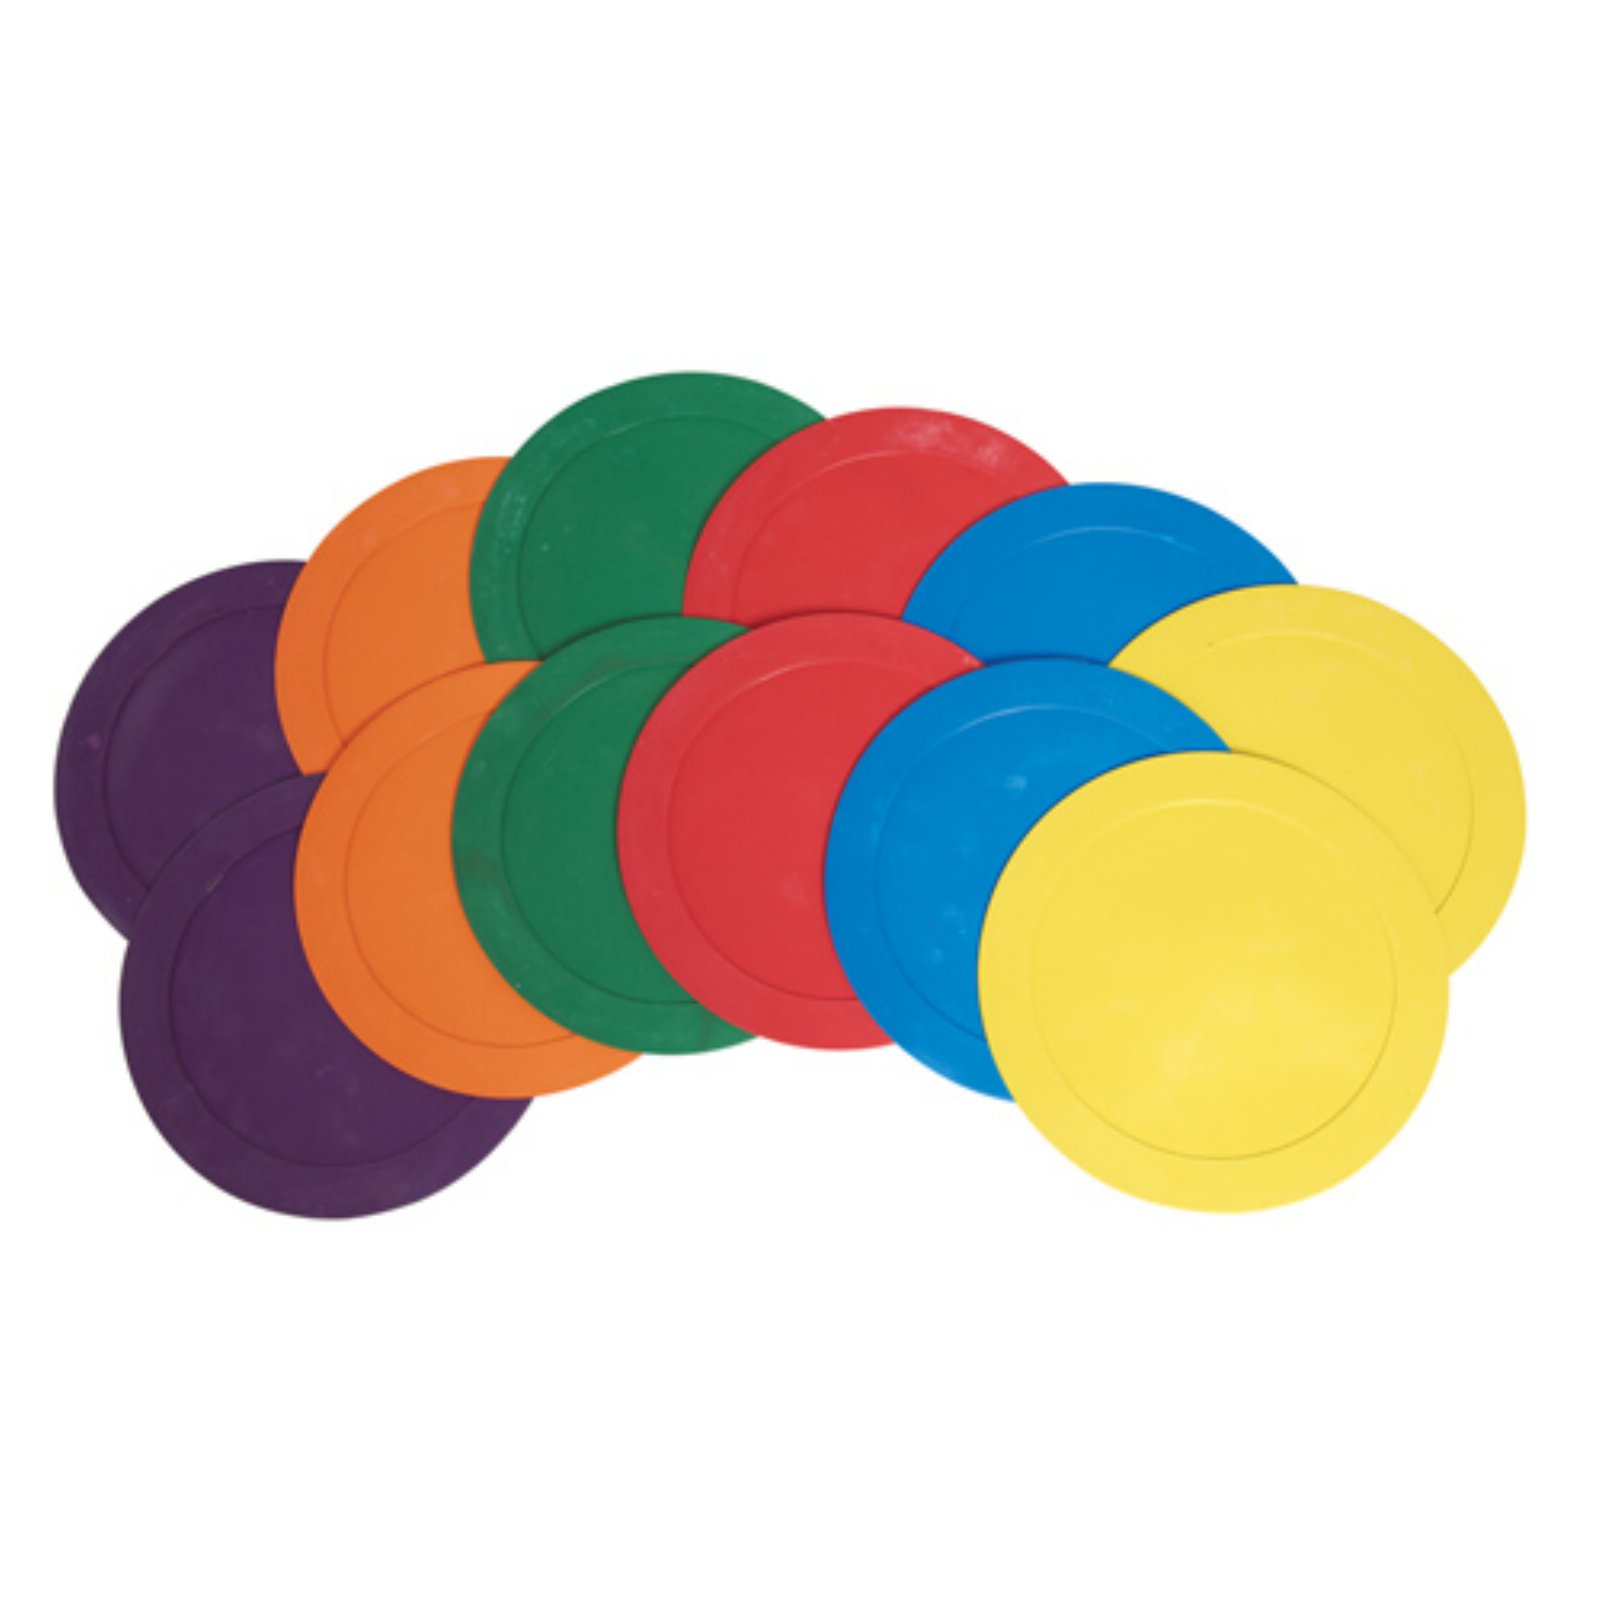 Skid Rubber Spot Markers Colorful Sport Markers12 pcs